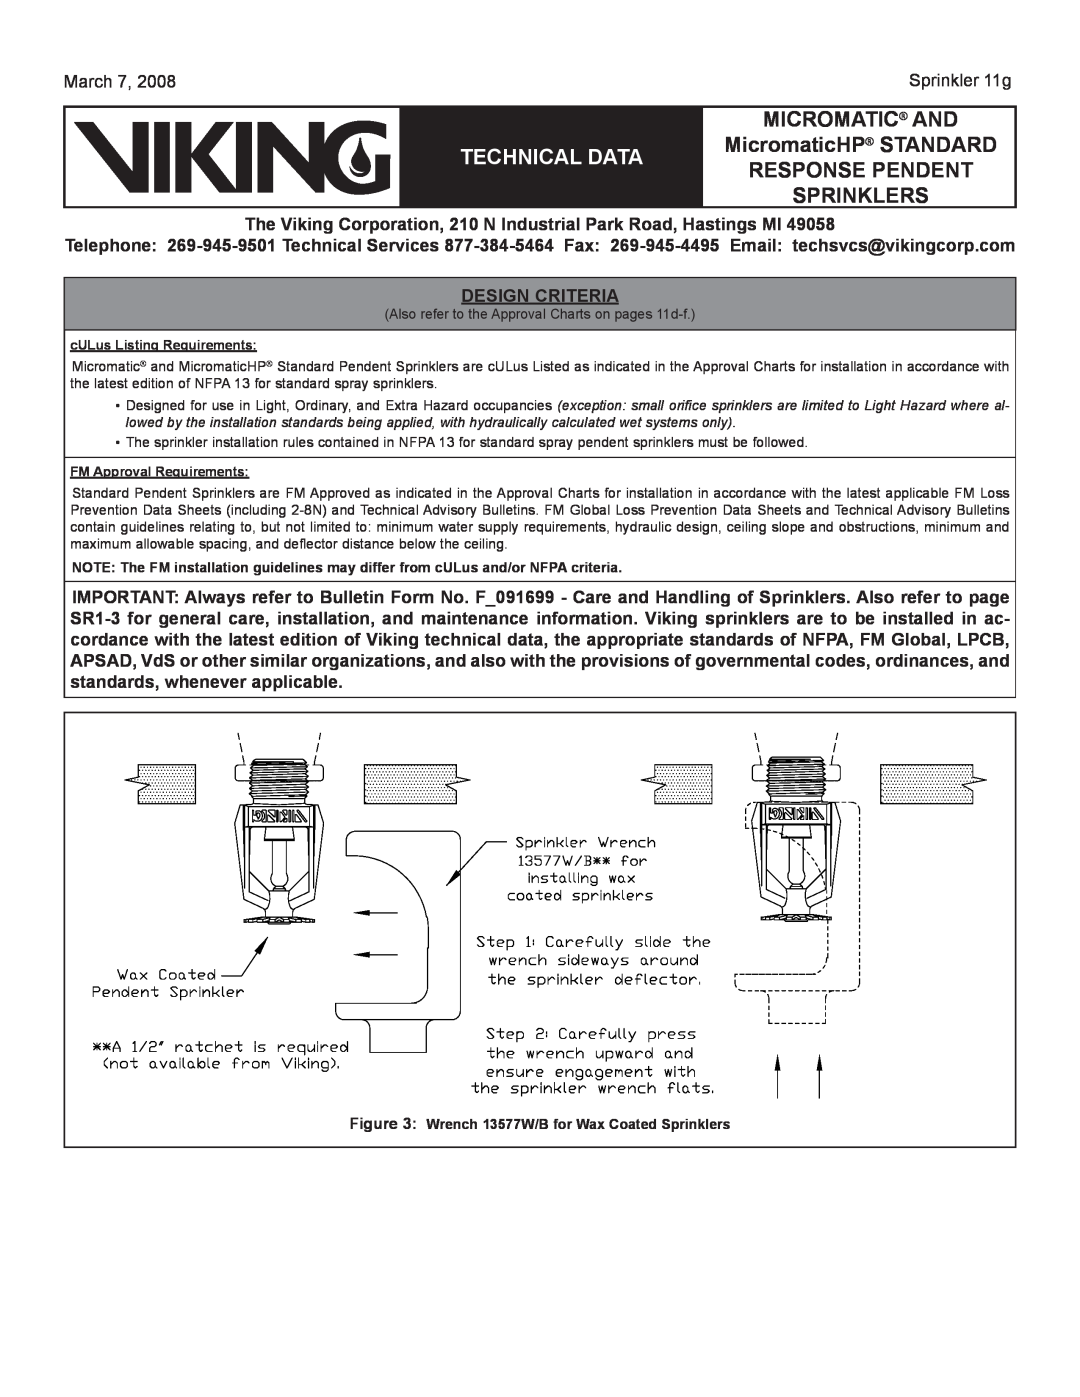 Viking Sprinkler 11a Design Criteria, MICROMATIC AND TECHNICAL DATA MicromaticHP STANDARD RESPONSE PENDENT, Sprinklers 